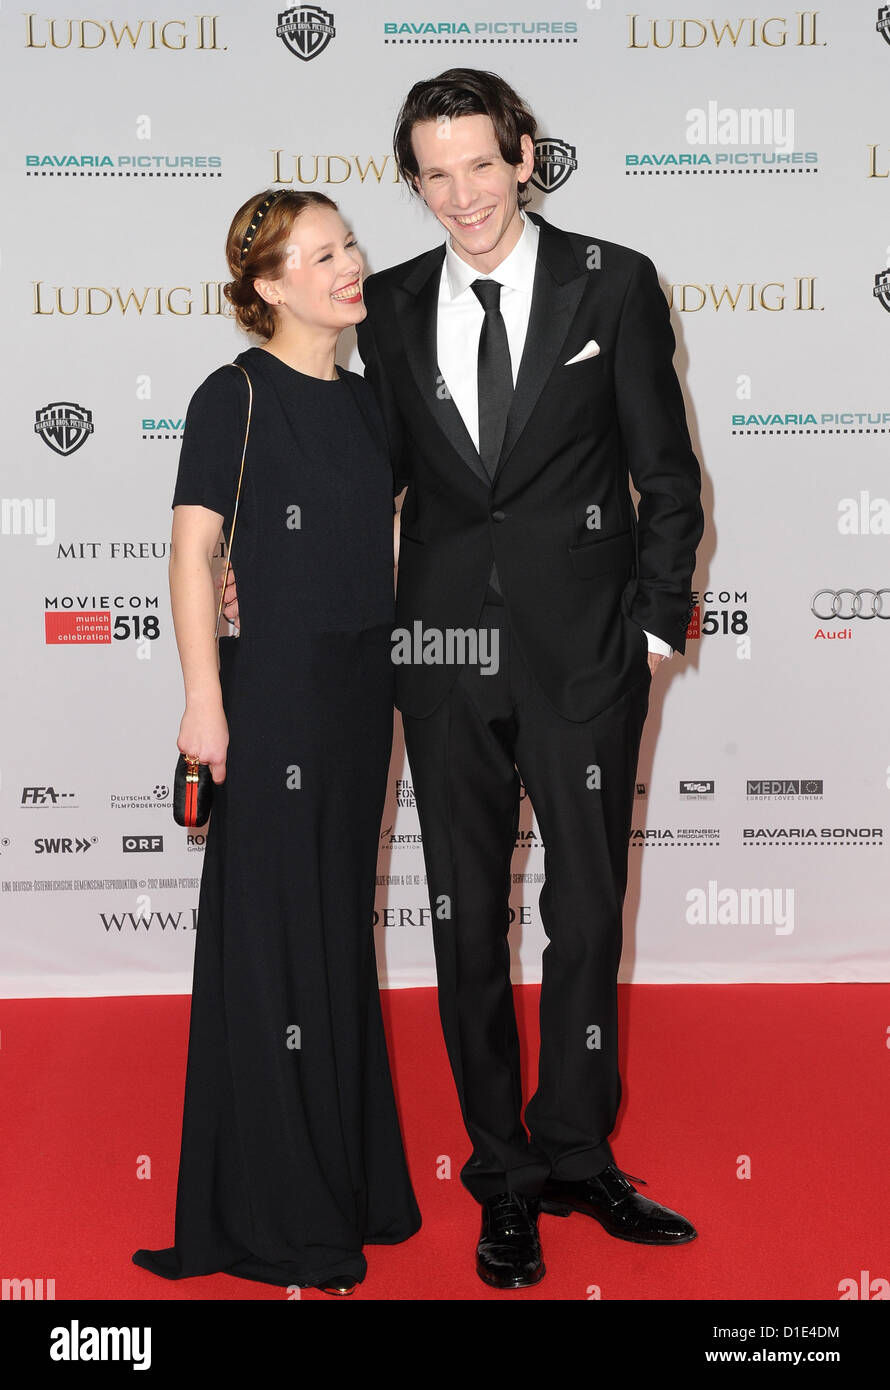 Actors Paula Beer ans Sabin Tambrea pose on the red carpet at the world premiere of the historic movie 'Ludwig II' at HVB Forum in Munich, Germany, 13 December 2012. The movie will come to German cinemas on 26 December 2012. Photo: Ursula Dueren Stock Photo